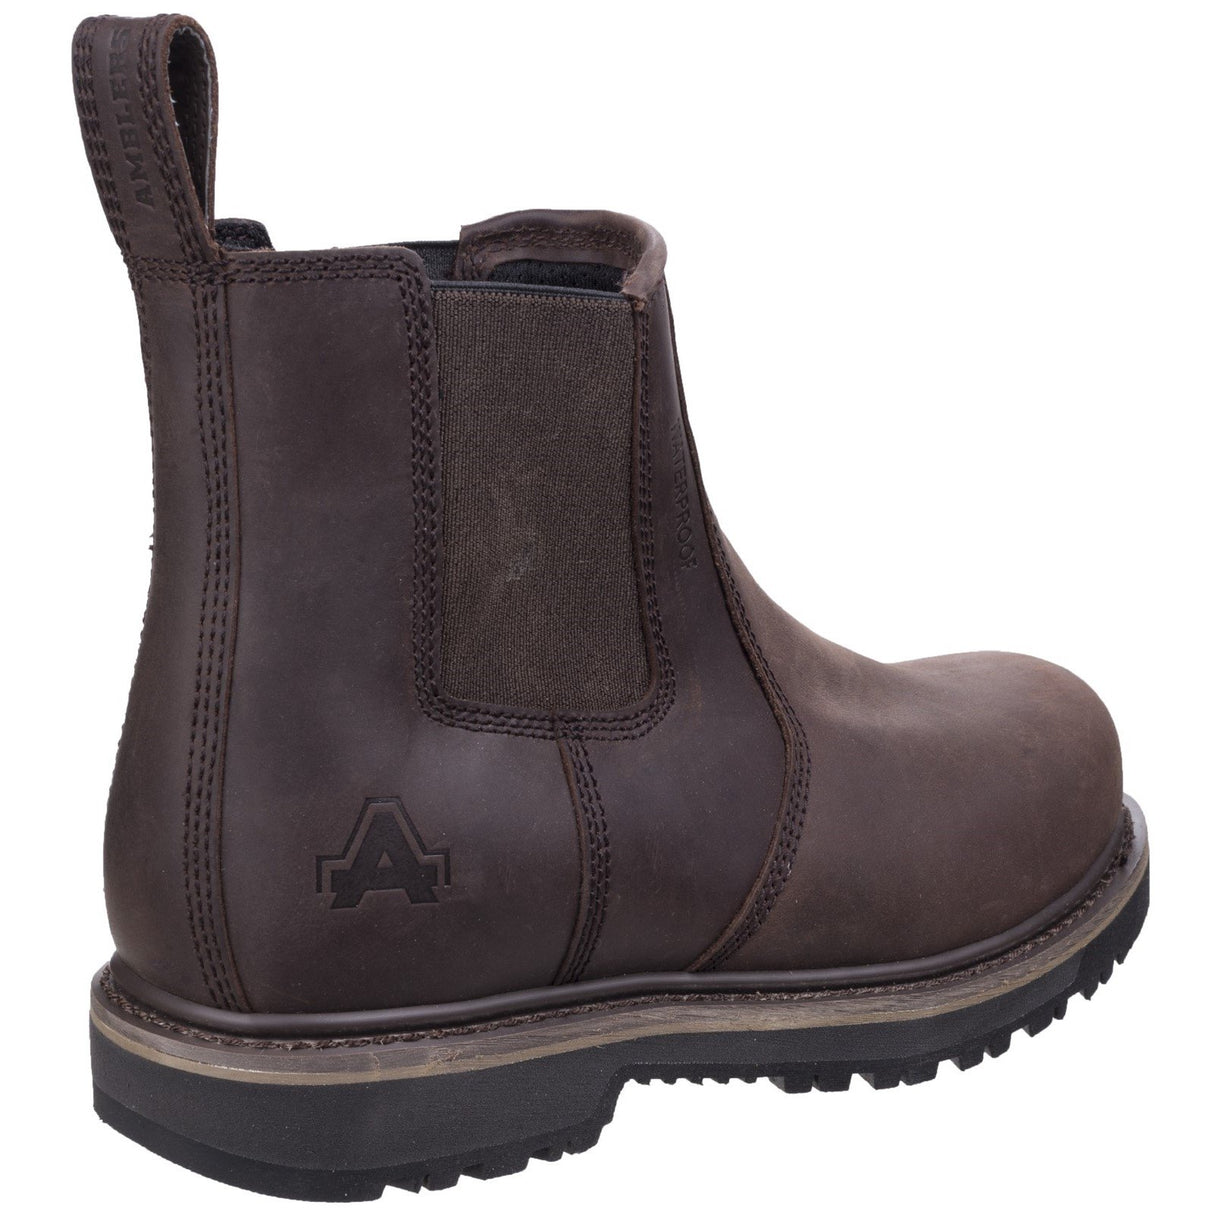 Amblers Safety Goodyear Welted Chelsea Safety Boots